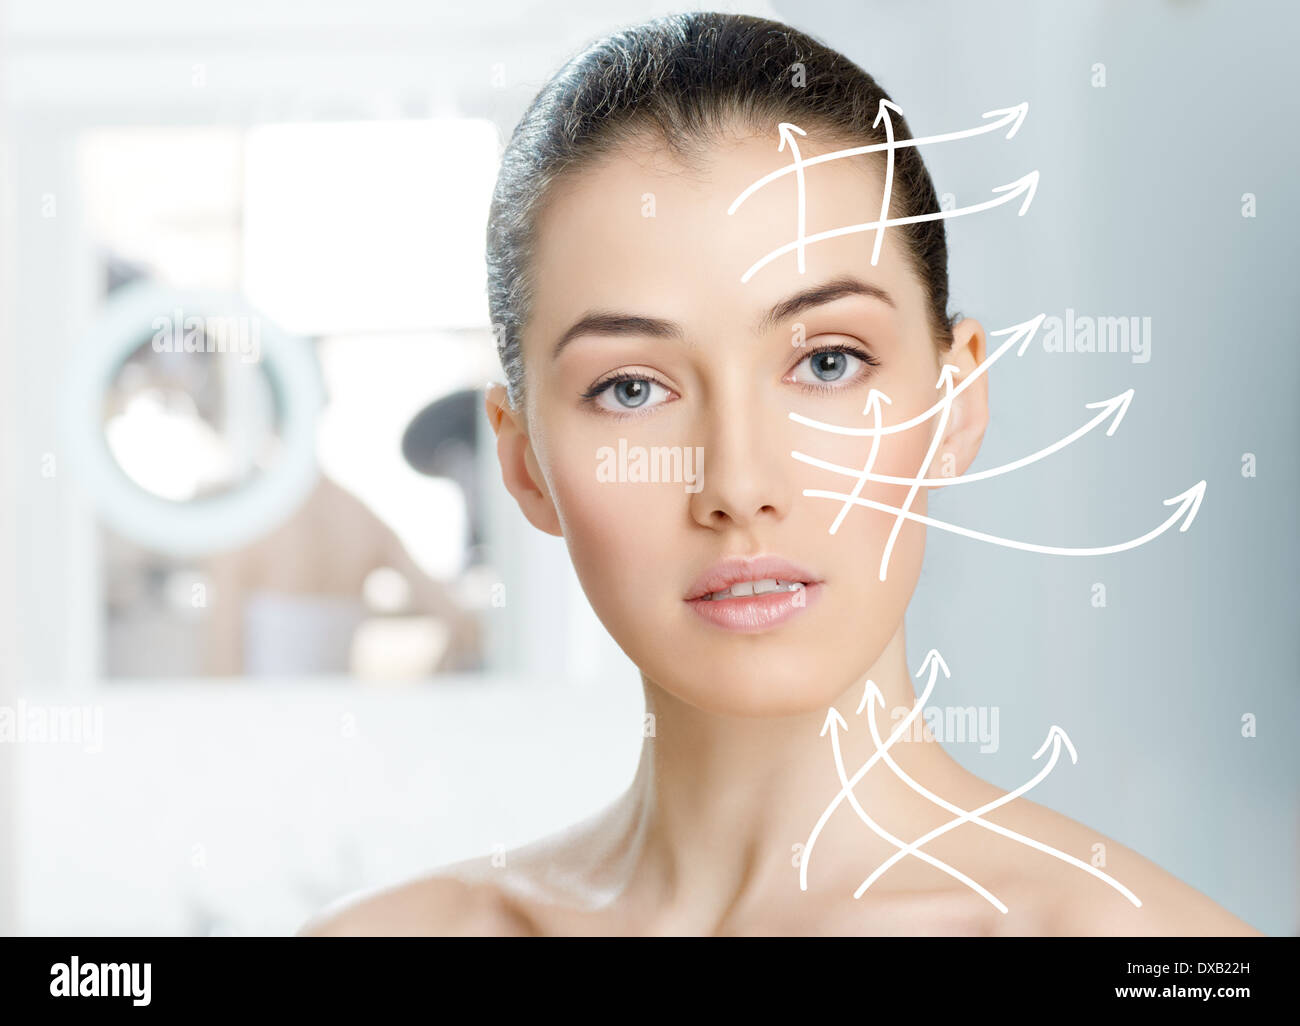 beauty woman on the bathroom background Stock Photo